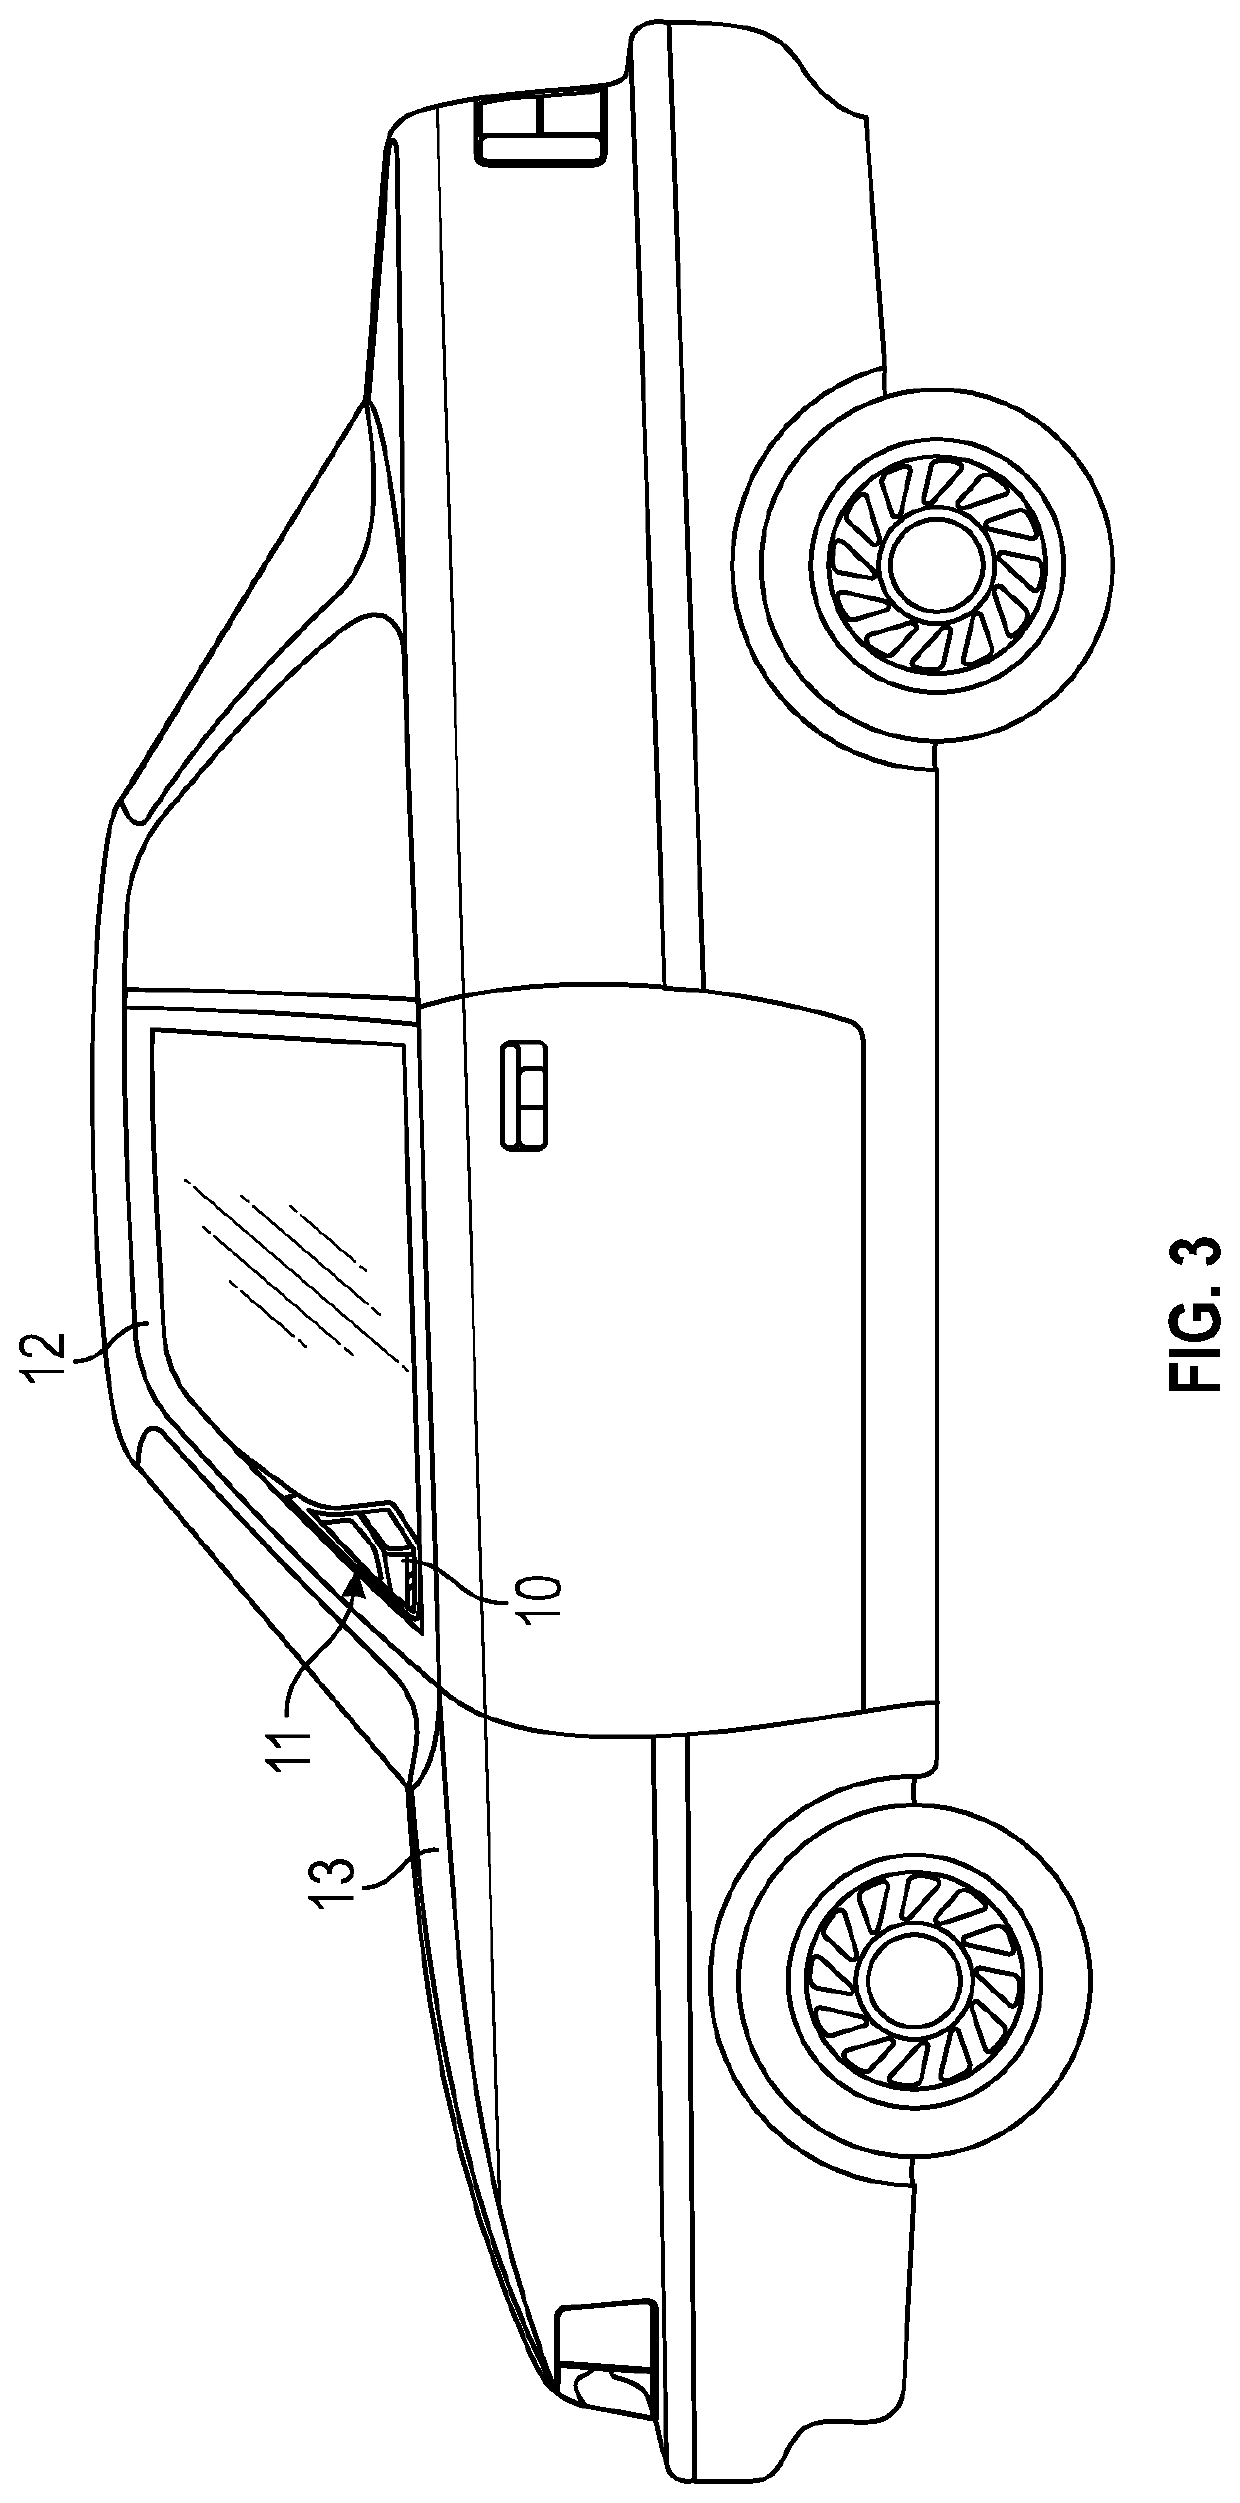 Deployable side shark fin with integrated side view camera and sensing device